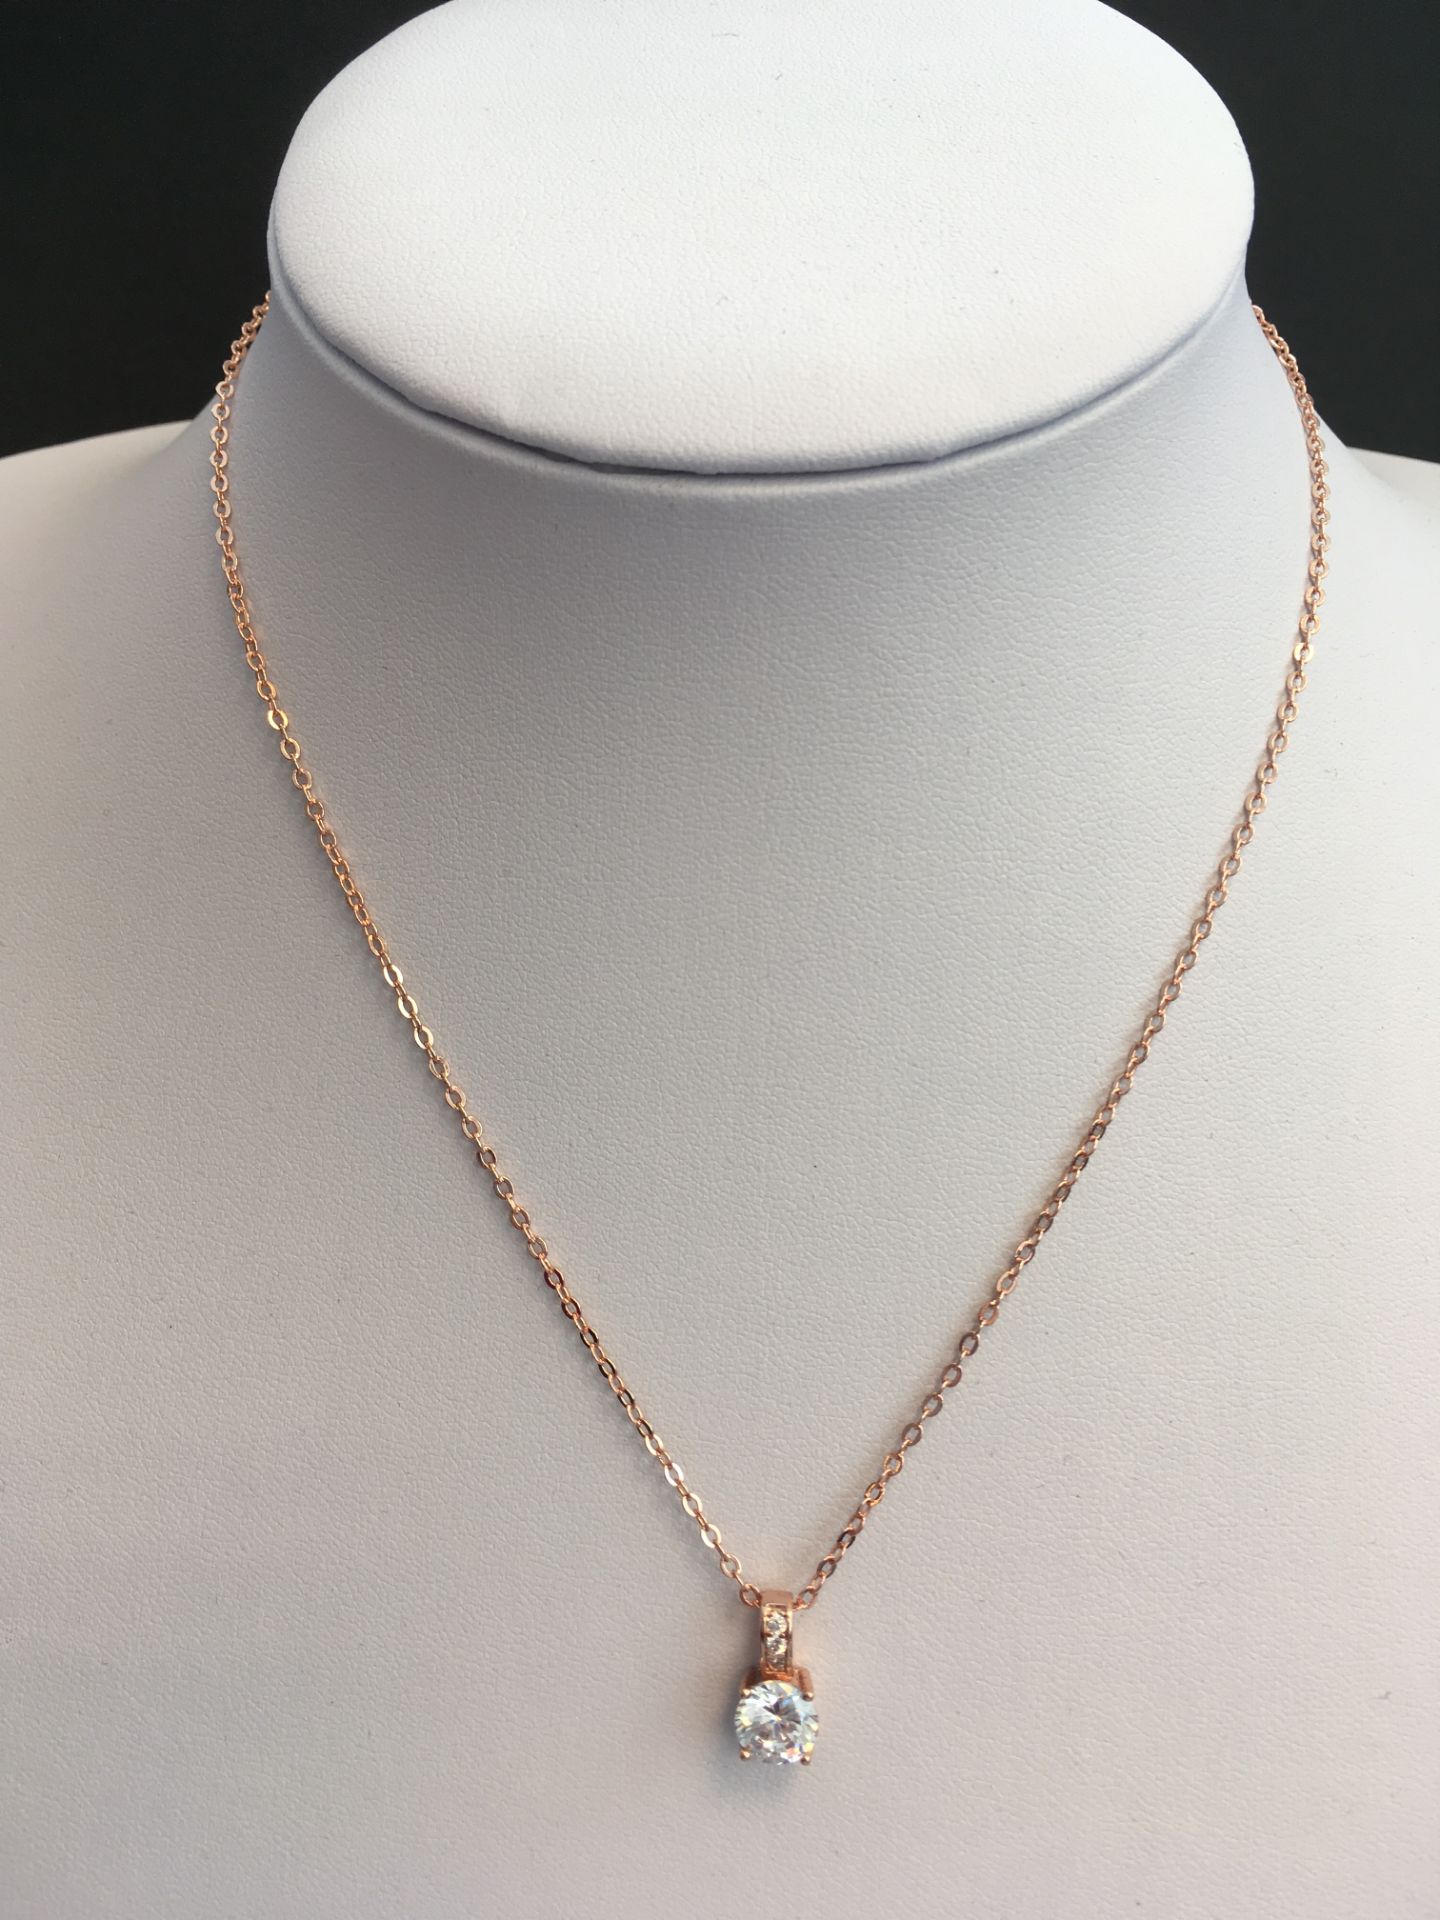 Rose Gold Plated, Three Piece, Necklace, Earring¾and Ring Set¾with Cubic Zirconia Stones - Image 3 of 4